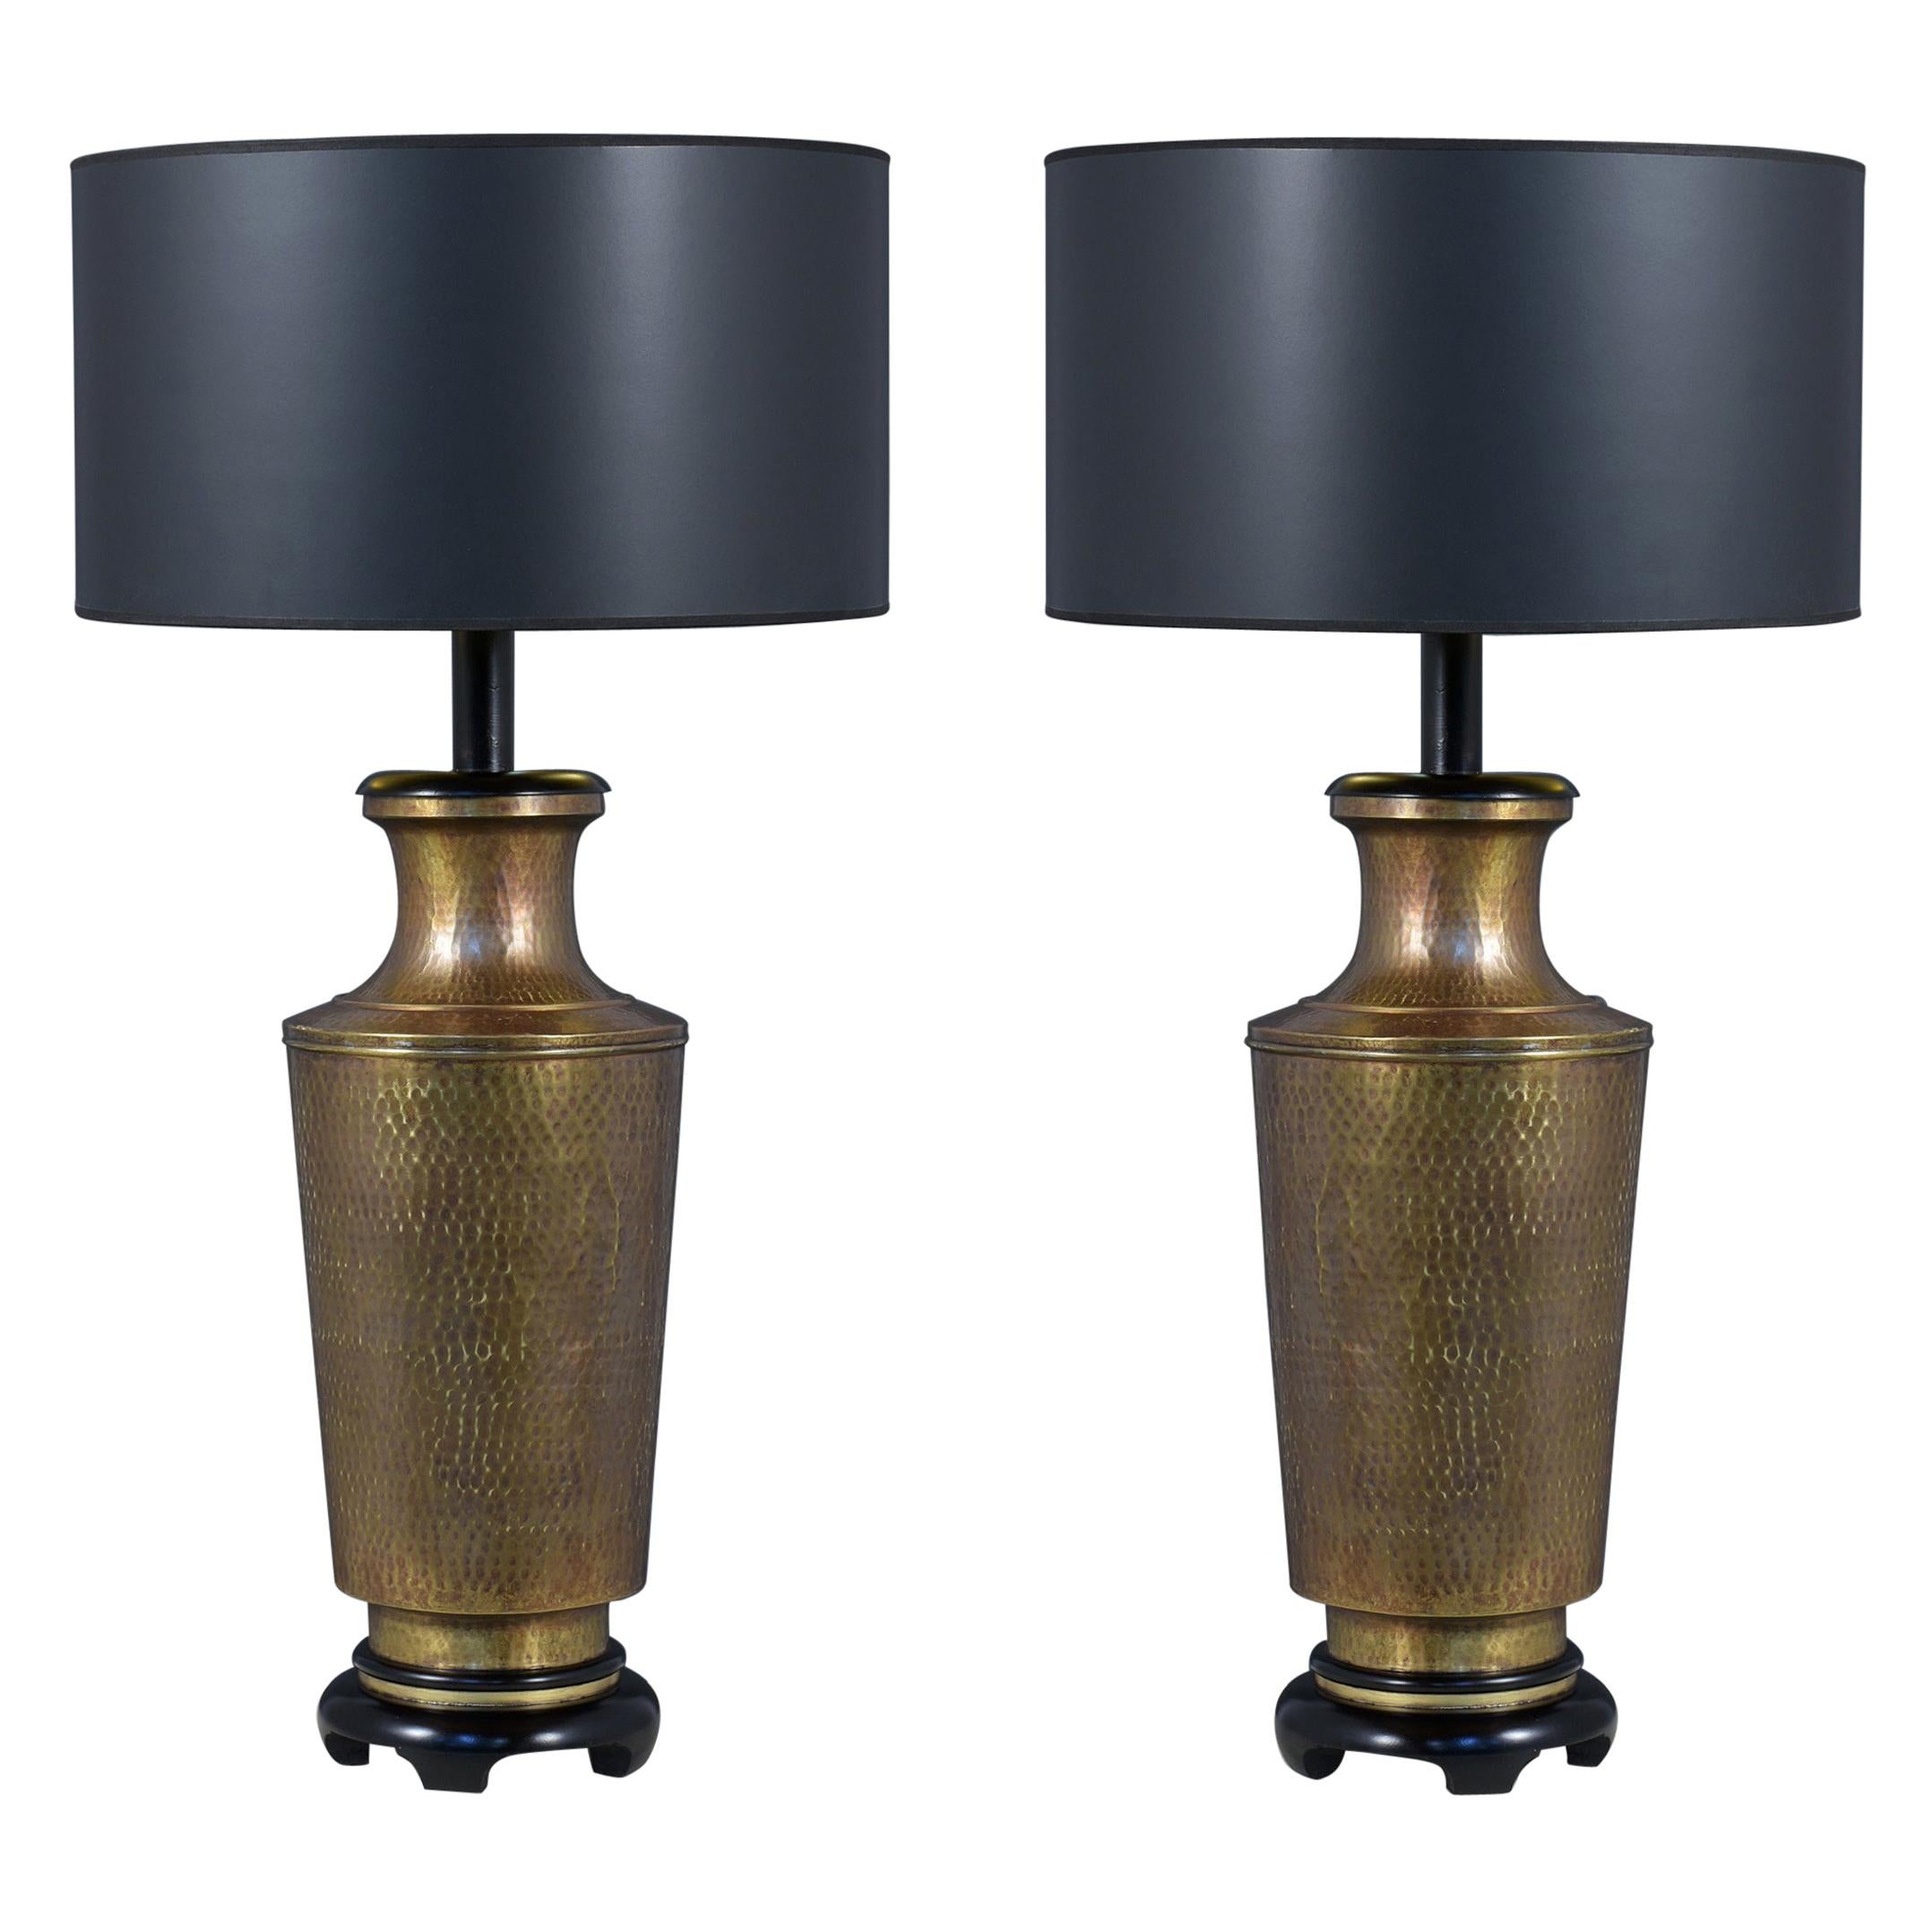 Pair of Vintage 1960's Brass Table Lamps